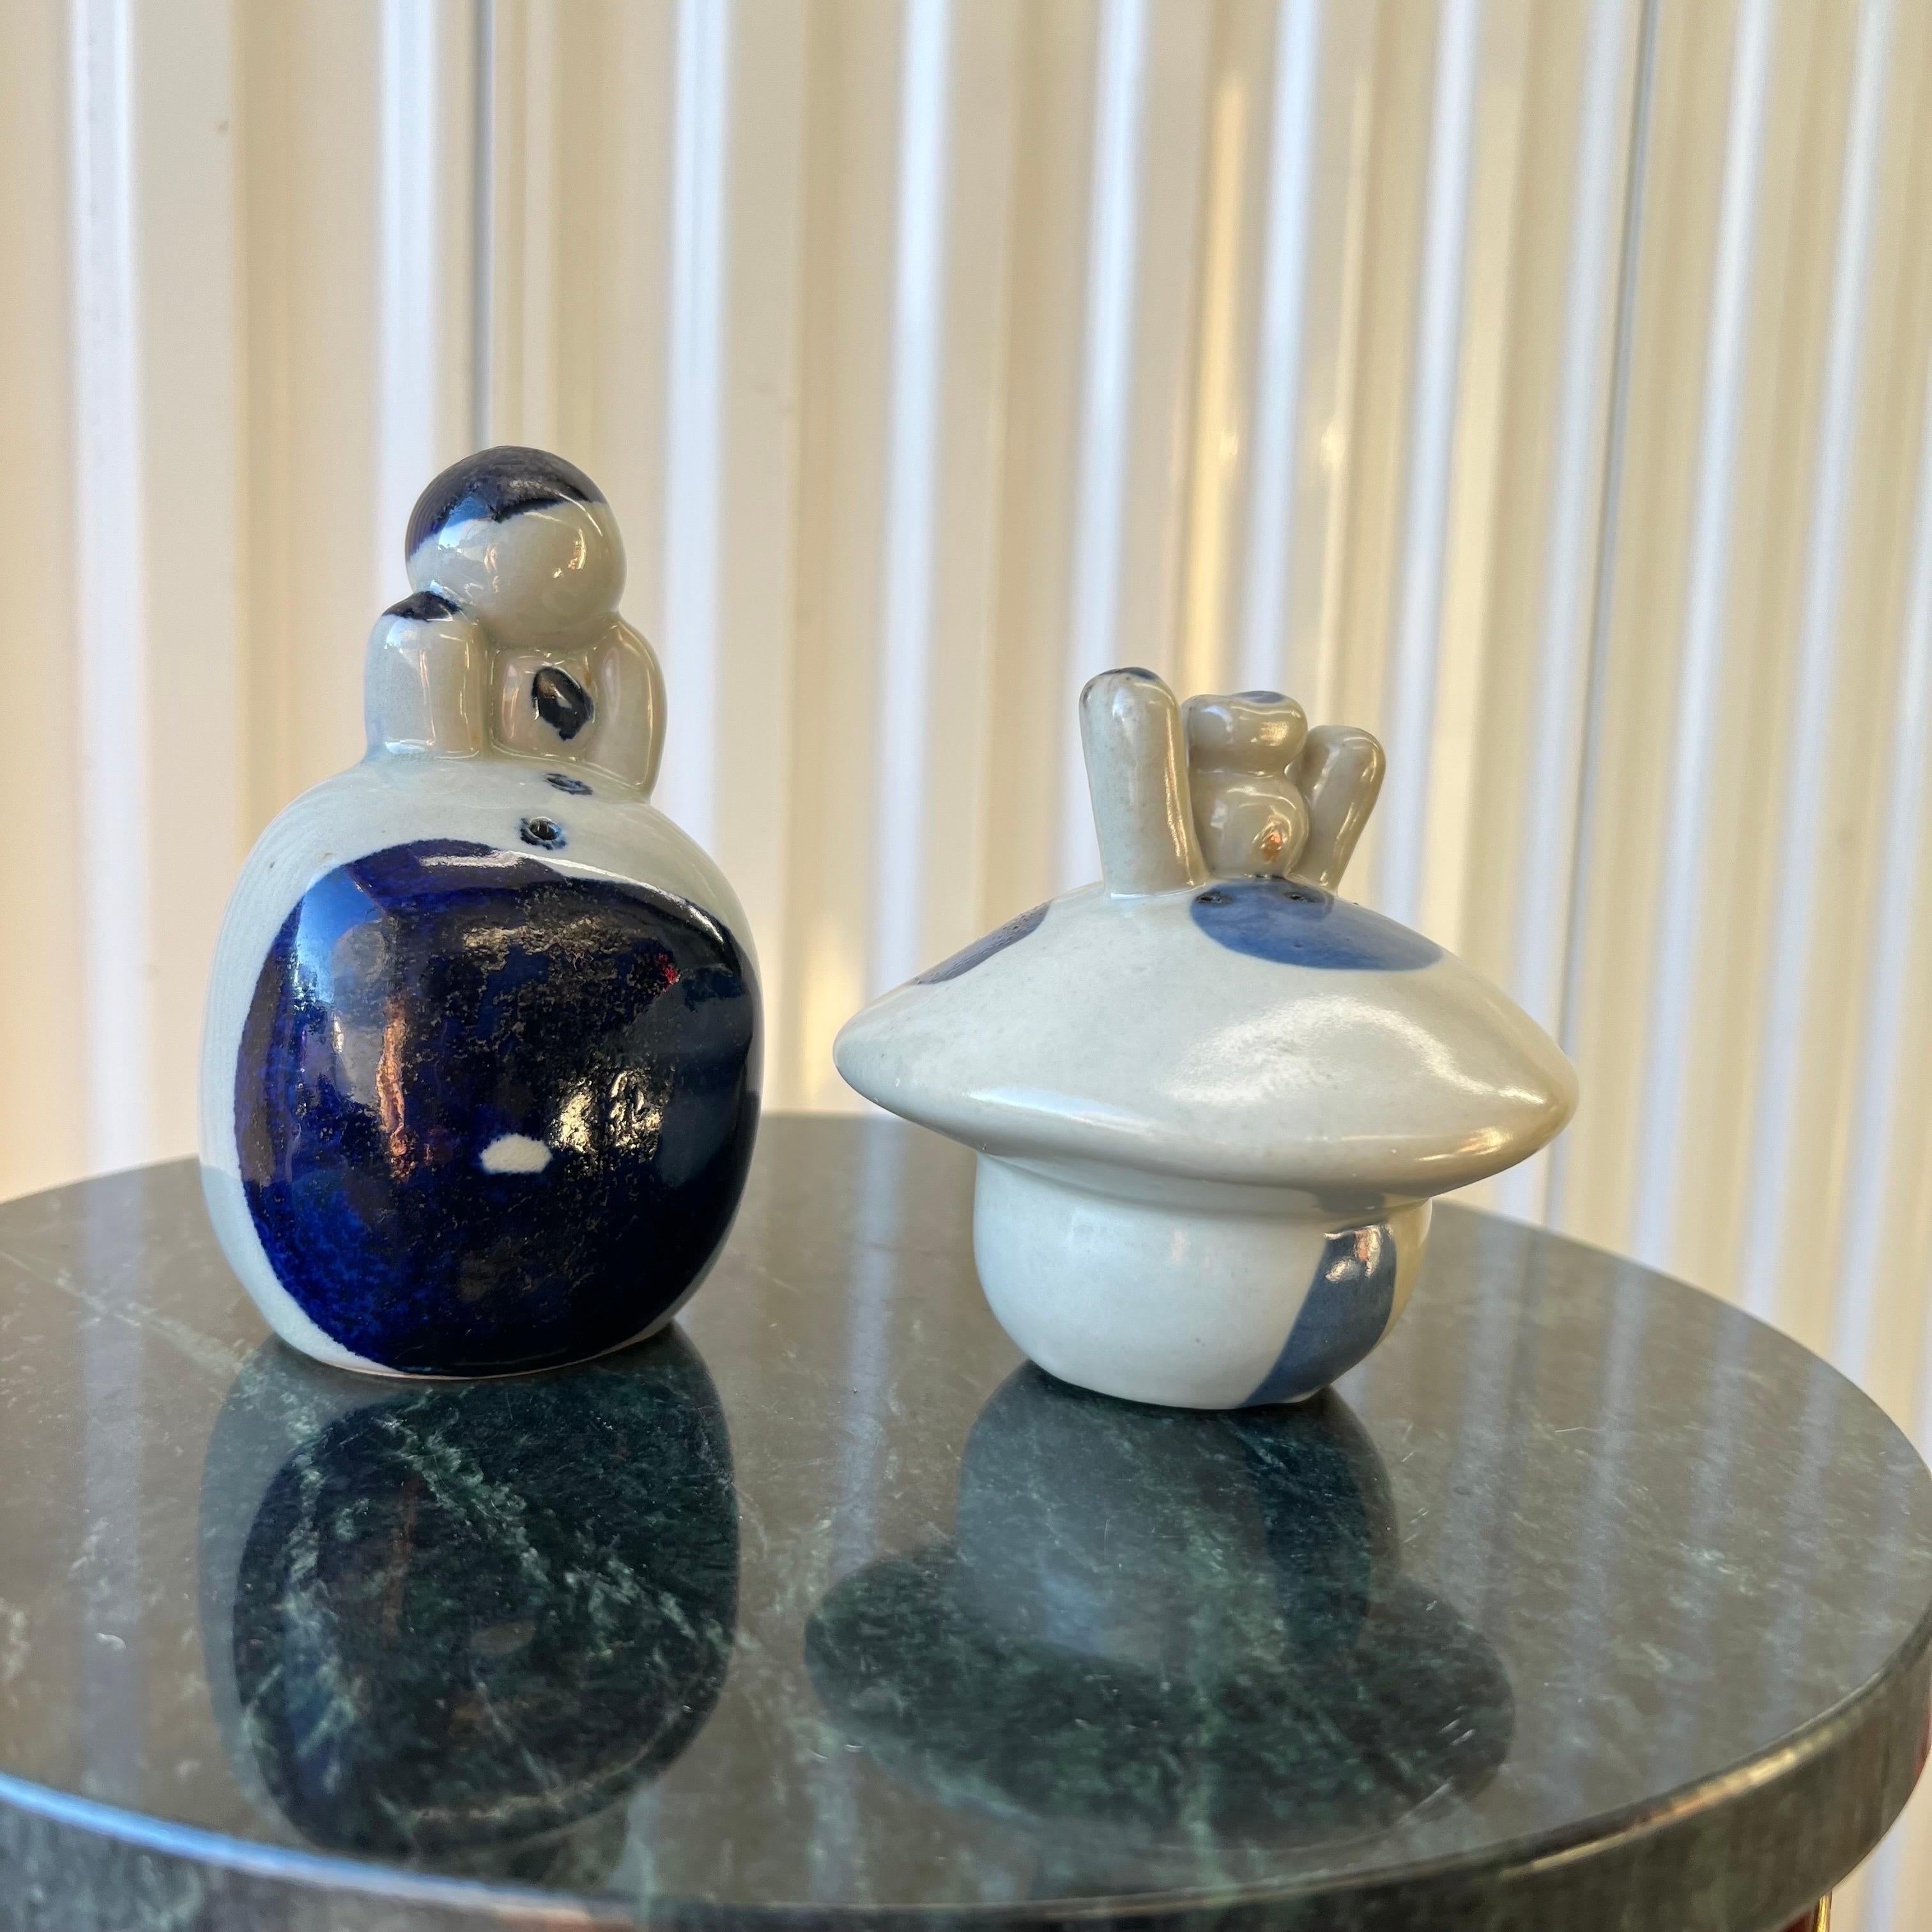 Stoneware Vintage Figurative Studio Pottery Salt and Pepper Shakers - a Pair For Sale